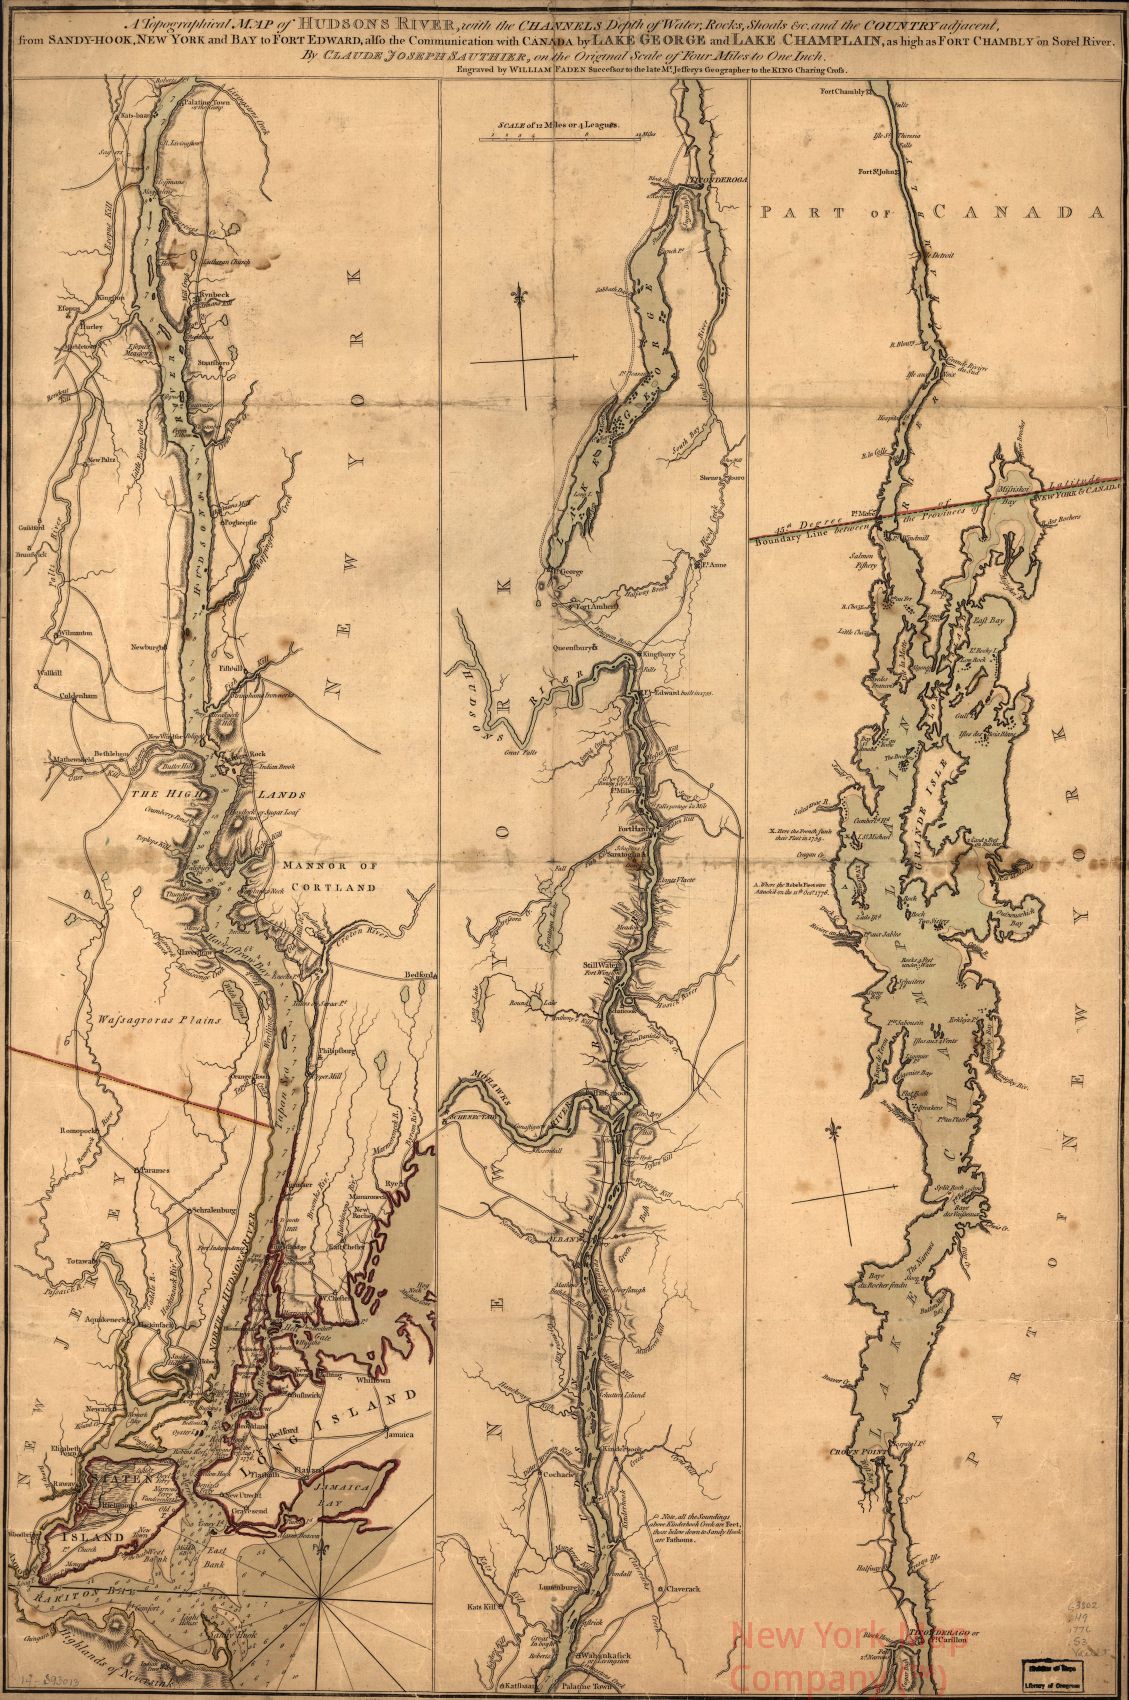 1777 map A topographical map of Hudsons River, with the channels depth of water, rocks, shoals andc. and the country adjacent, from Sandy-Hook, New York and bay to Fort Edward, also the communication with Canada by Lake George and Lake Champlain, as high